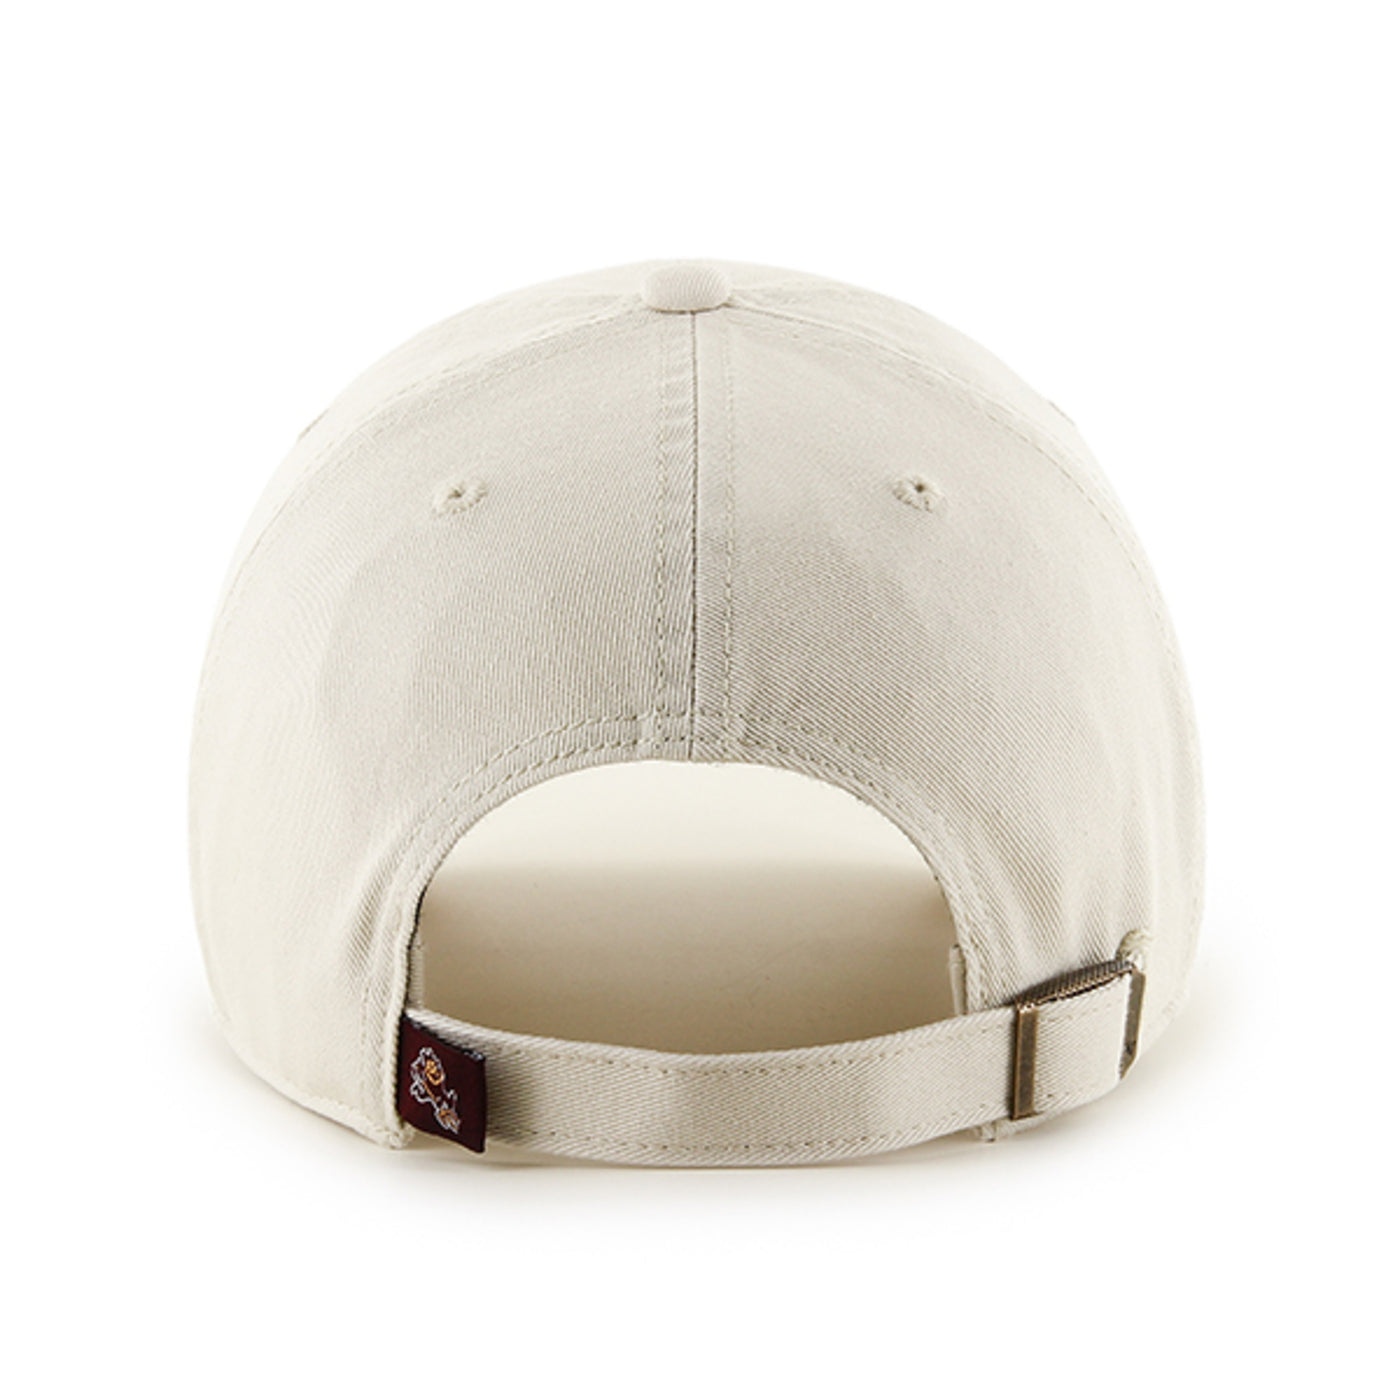 ASU cream colored adjustable hat with brass button closure and a maroon Sparky tag at the base